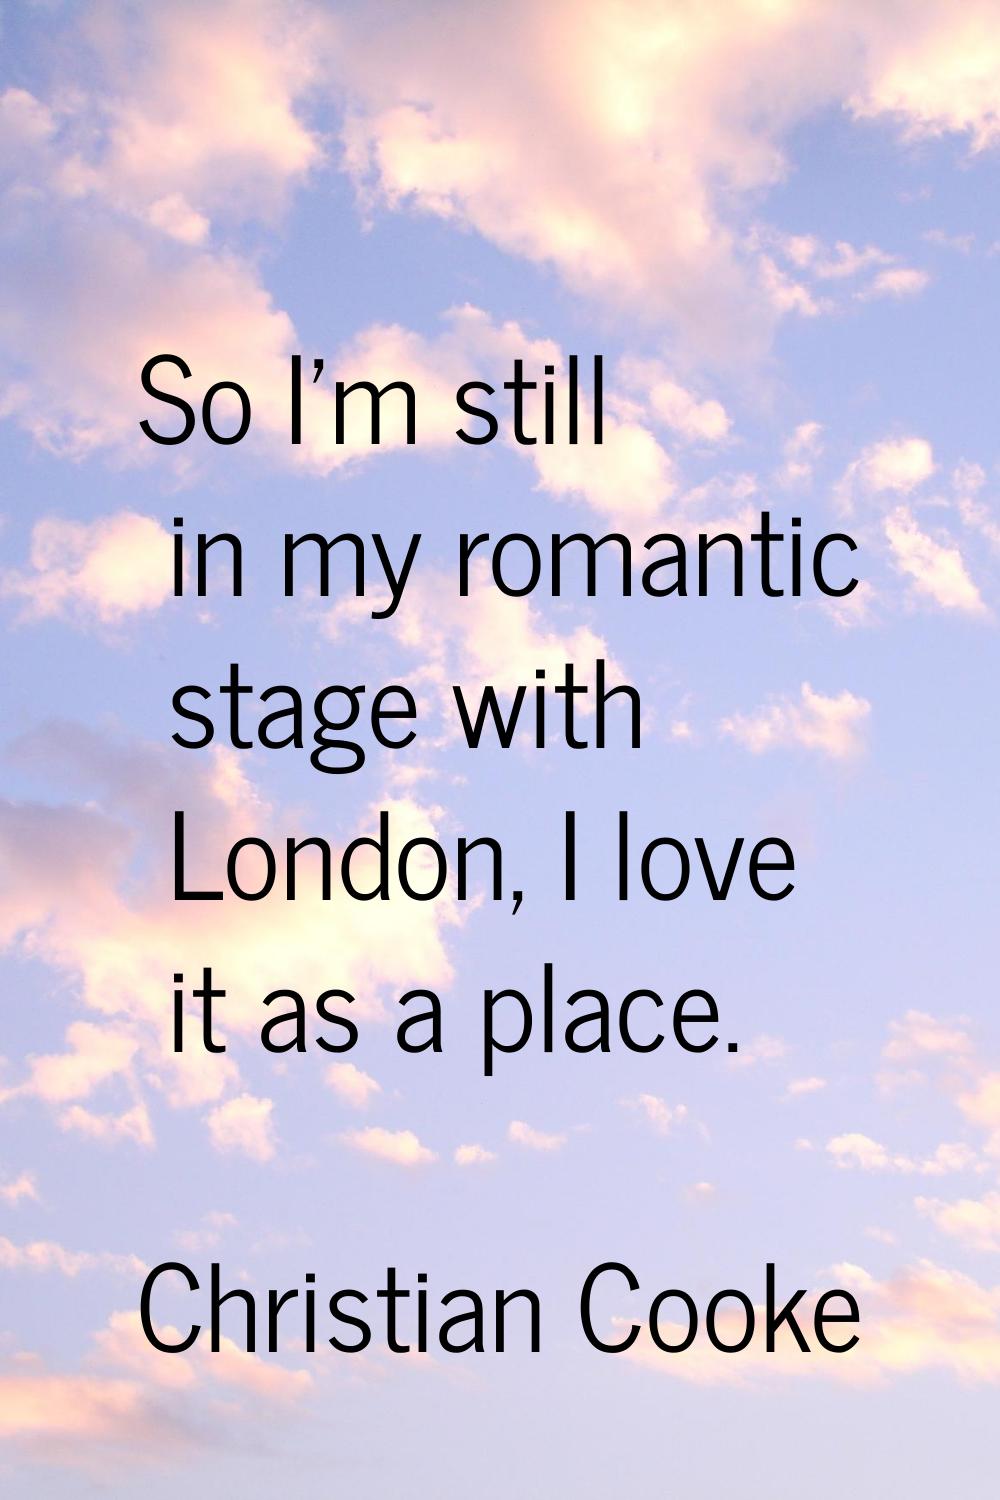 So I'm still in my romantic stage with London, I love it as a place.